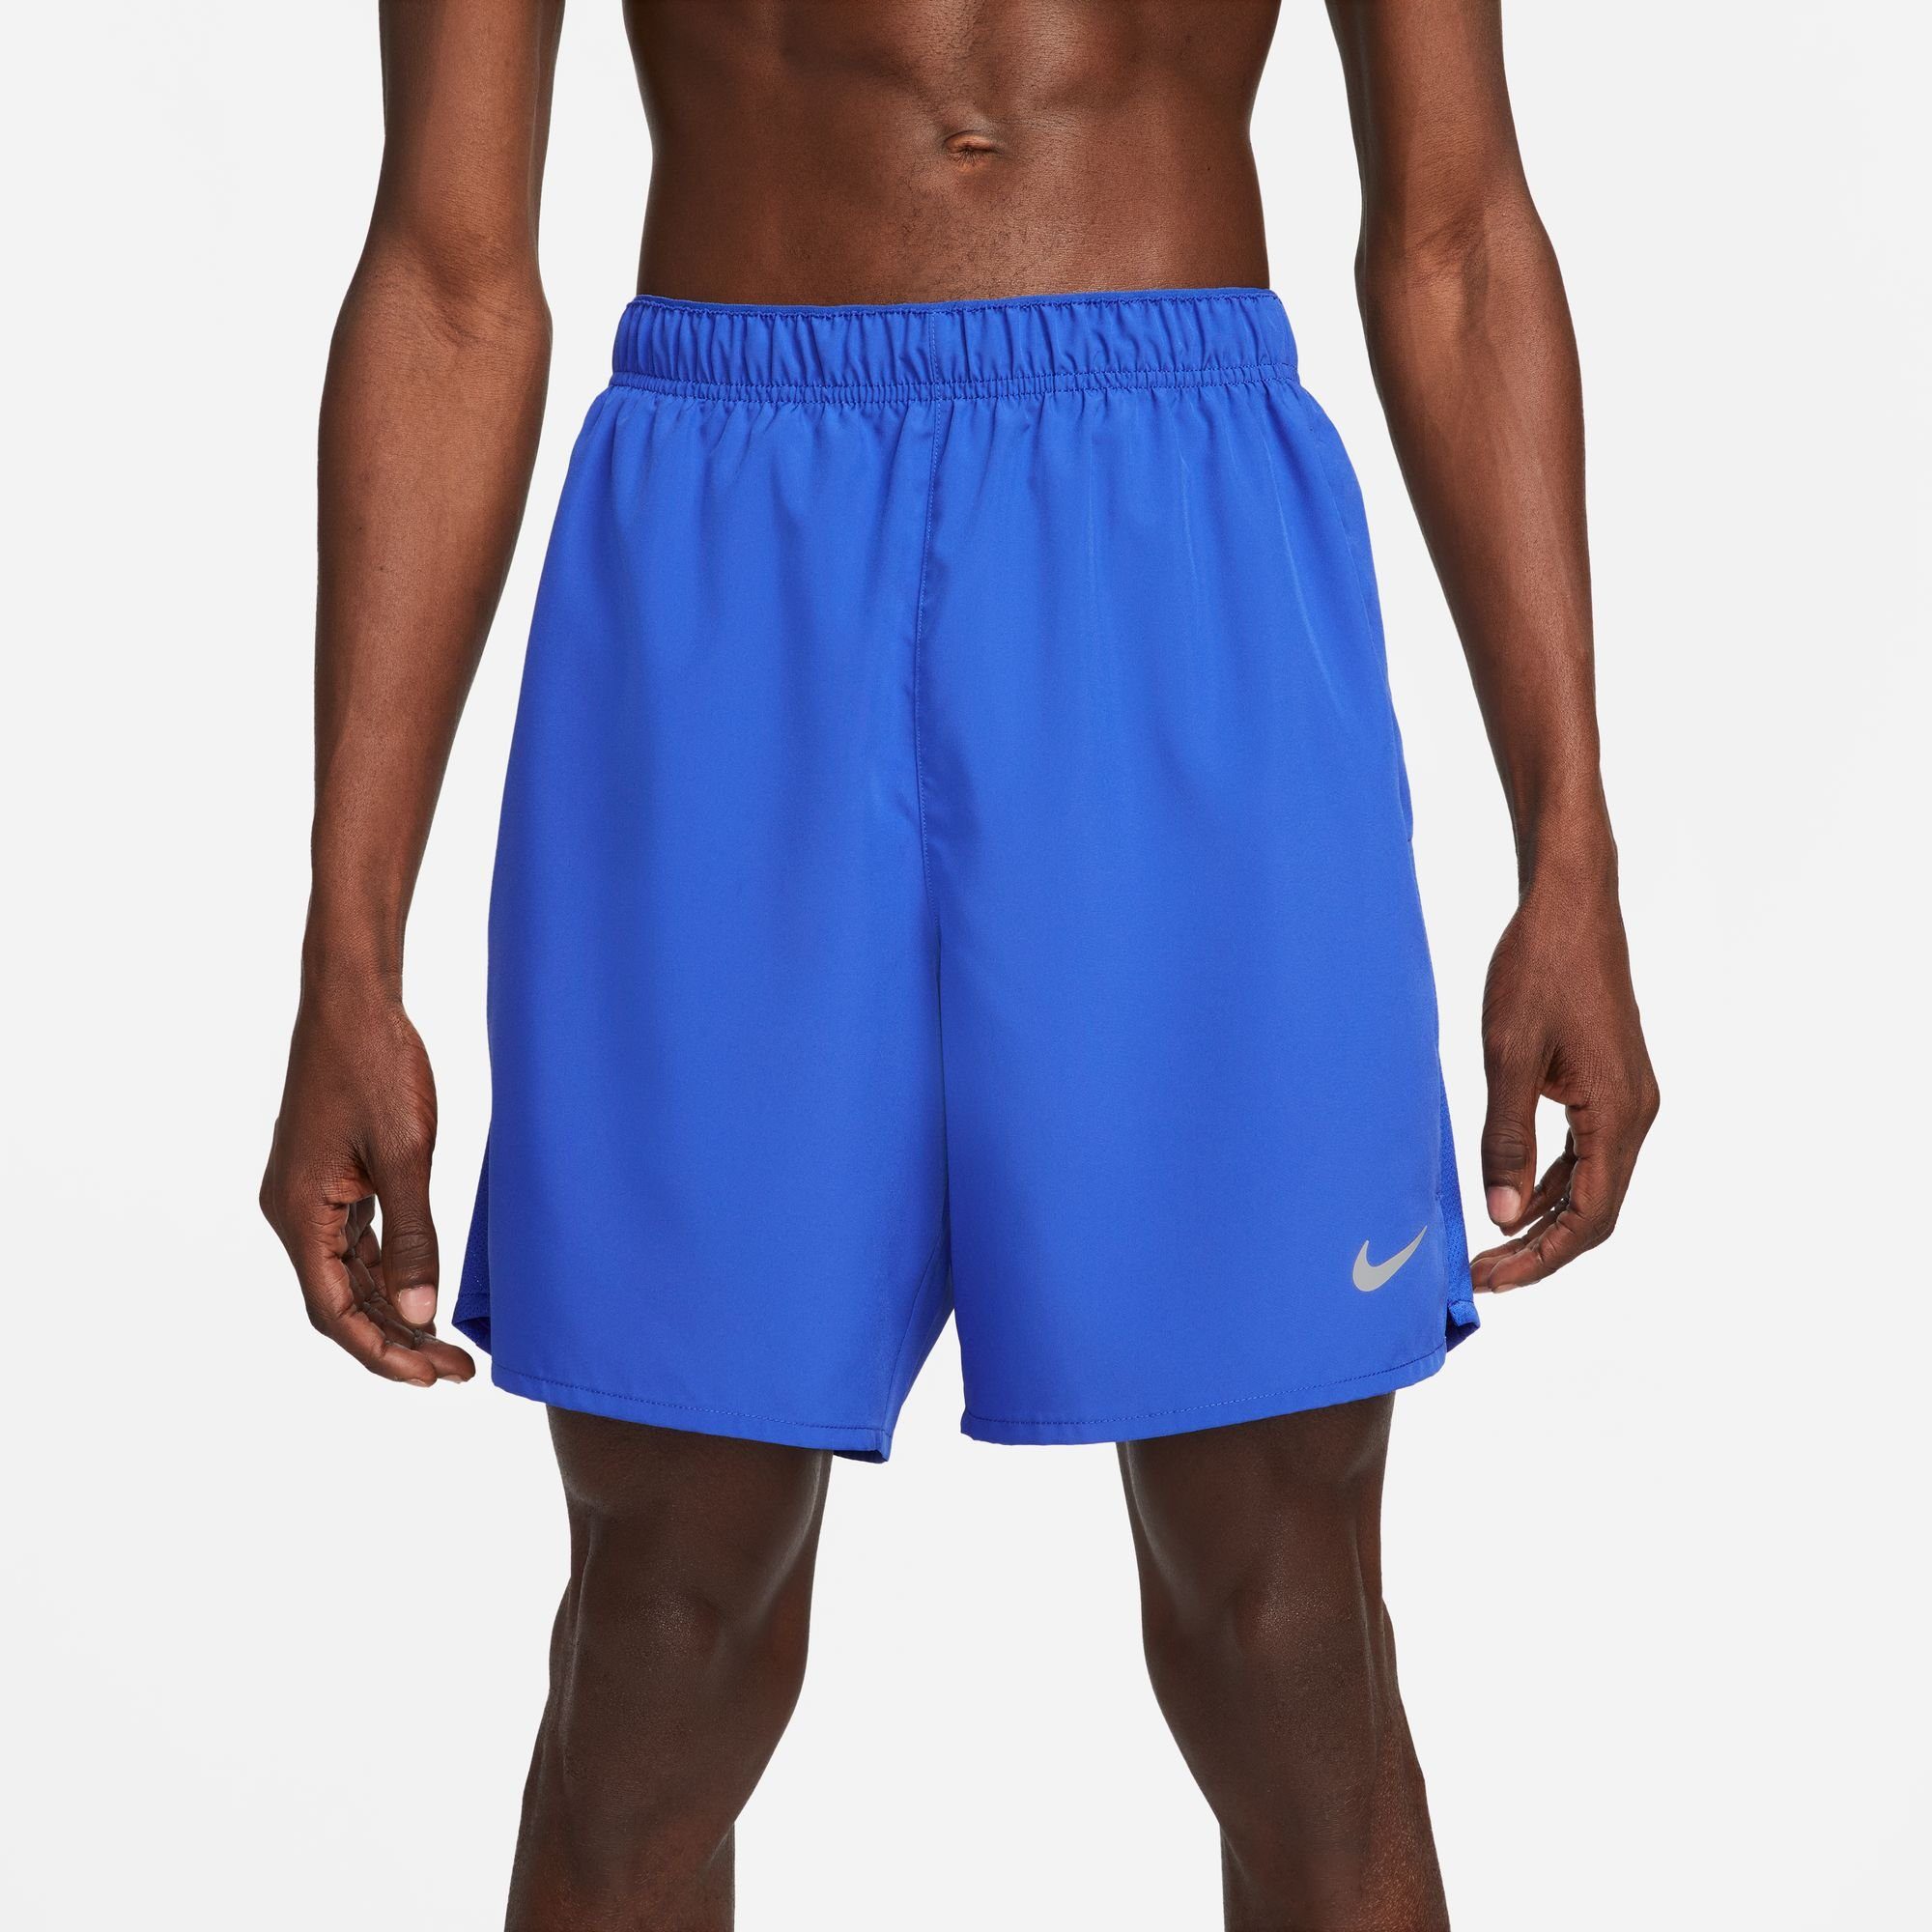 RUNNING SILV Nike MEN'S GAME ROYAL/GAME SHORTS ROYAL/REFLECTIVE Laufshorts DRI-FIT UNLINED CHALLENGER